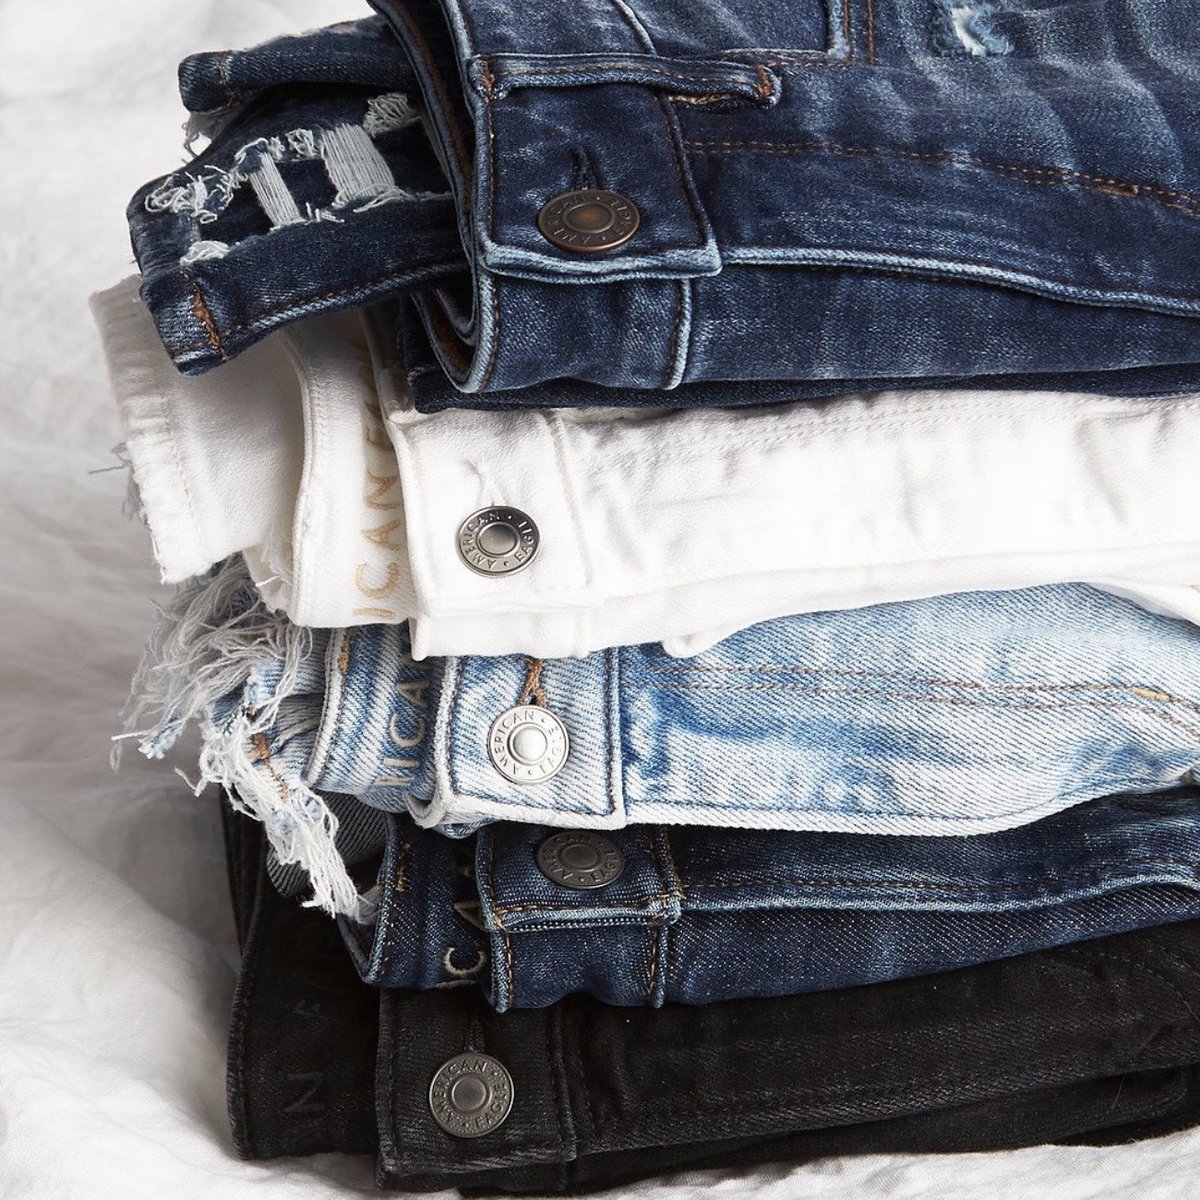 Find perfect fitting jeans at American Eagle 💙 With so many different styles, colours and fits to choose from, you're sure to find a great pair of denim! #YorkdaleStyle #CentreOfStyle #Denim #Jeans #Fashion @AEOutfitter